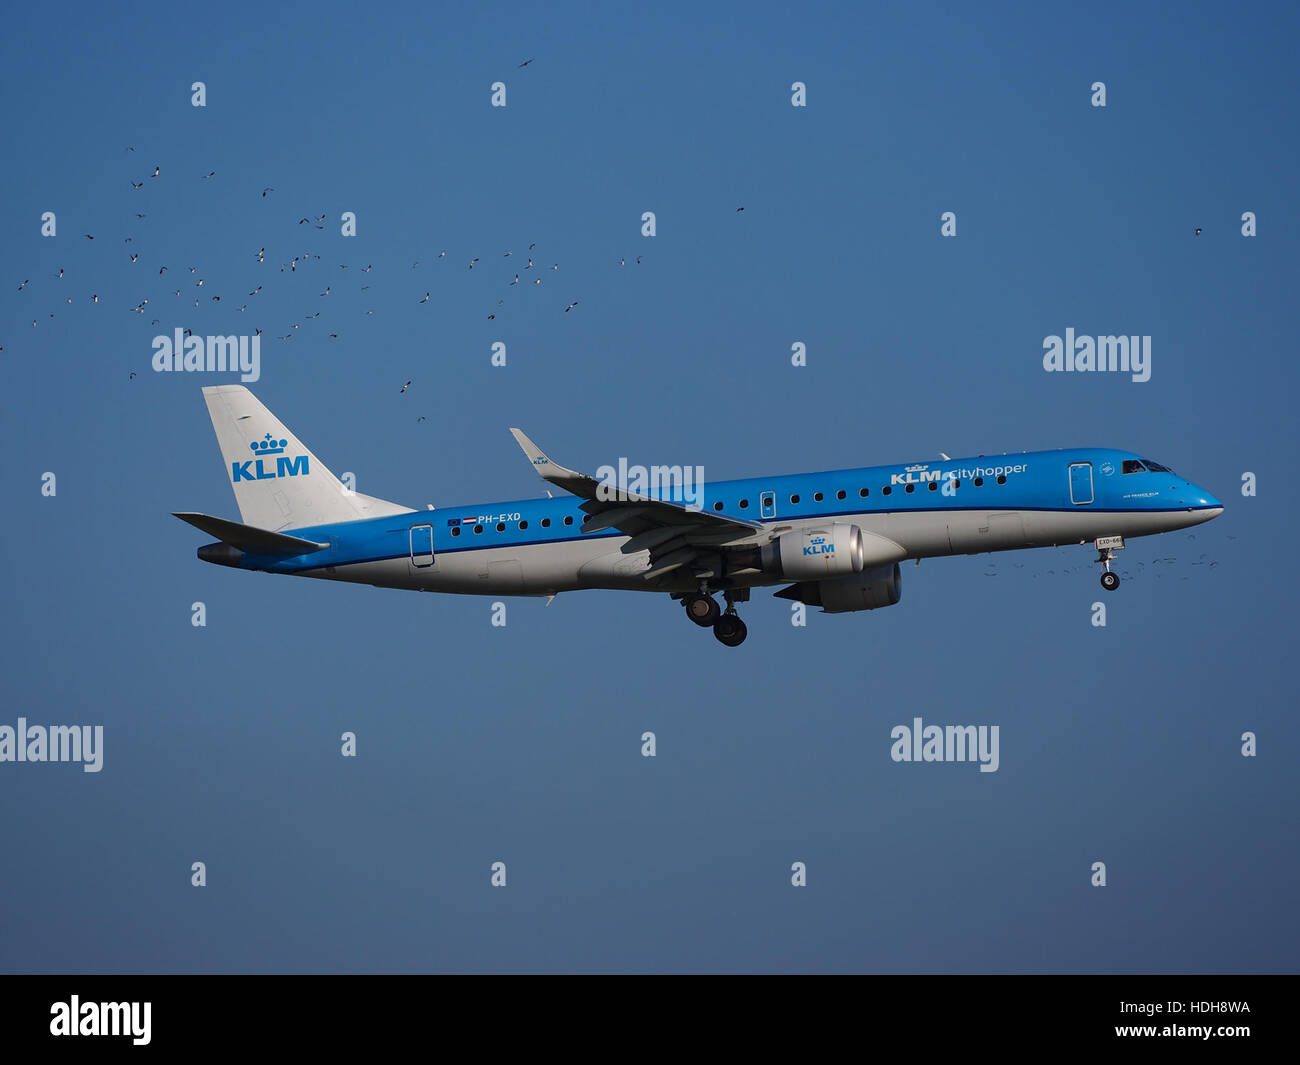 Avion avion flying sky fly wings cruising Banque D'Images